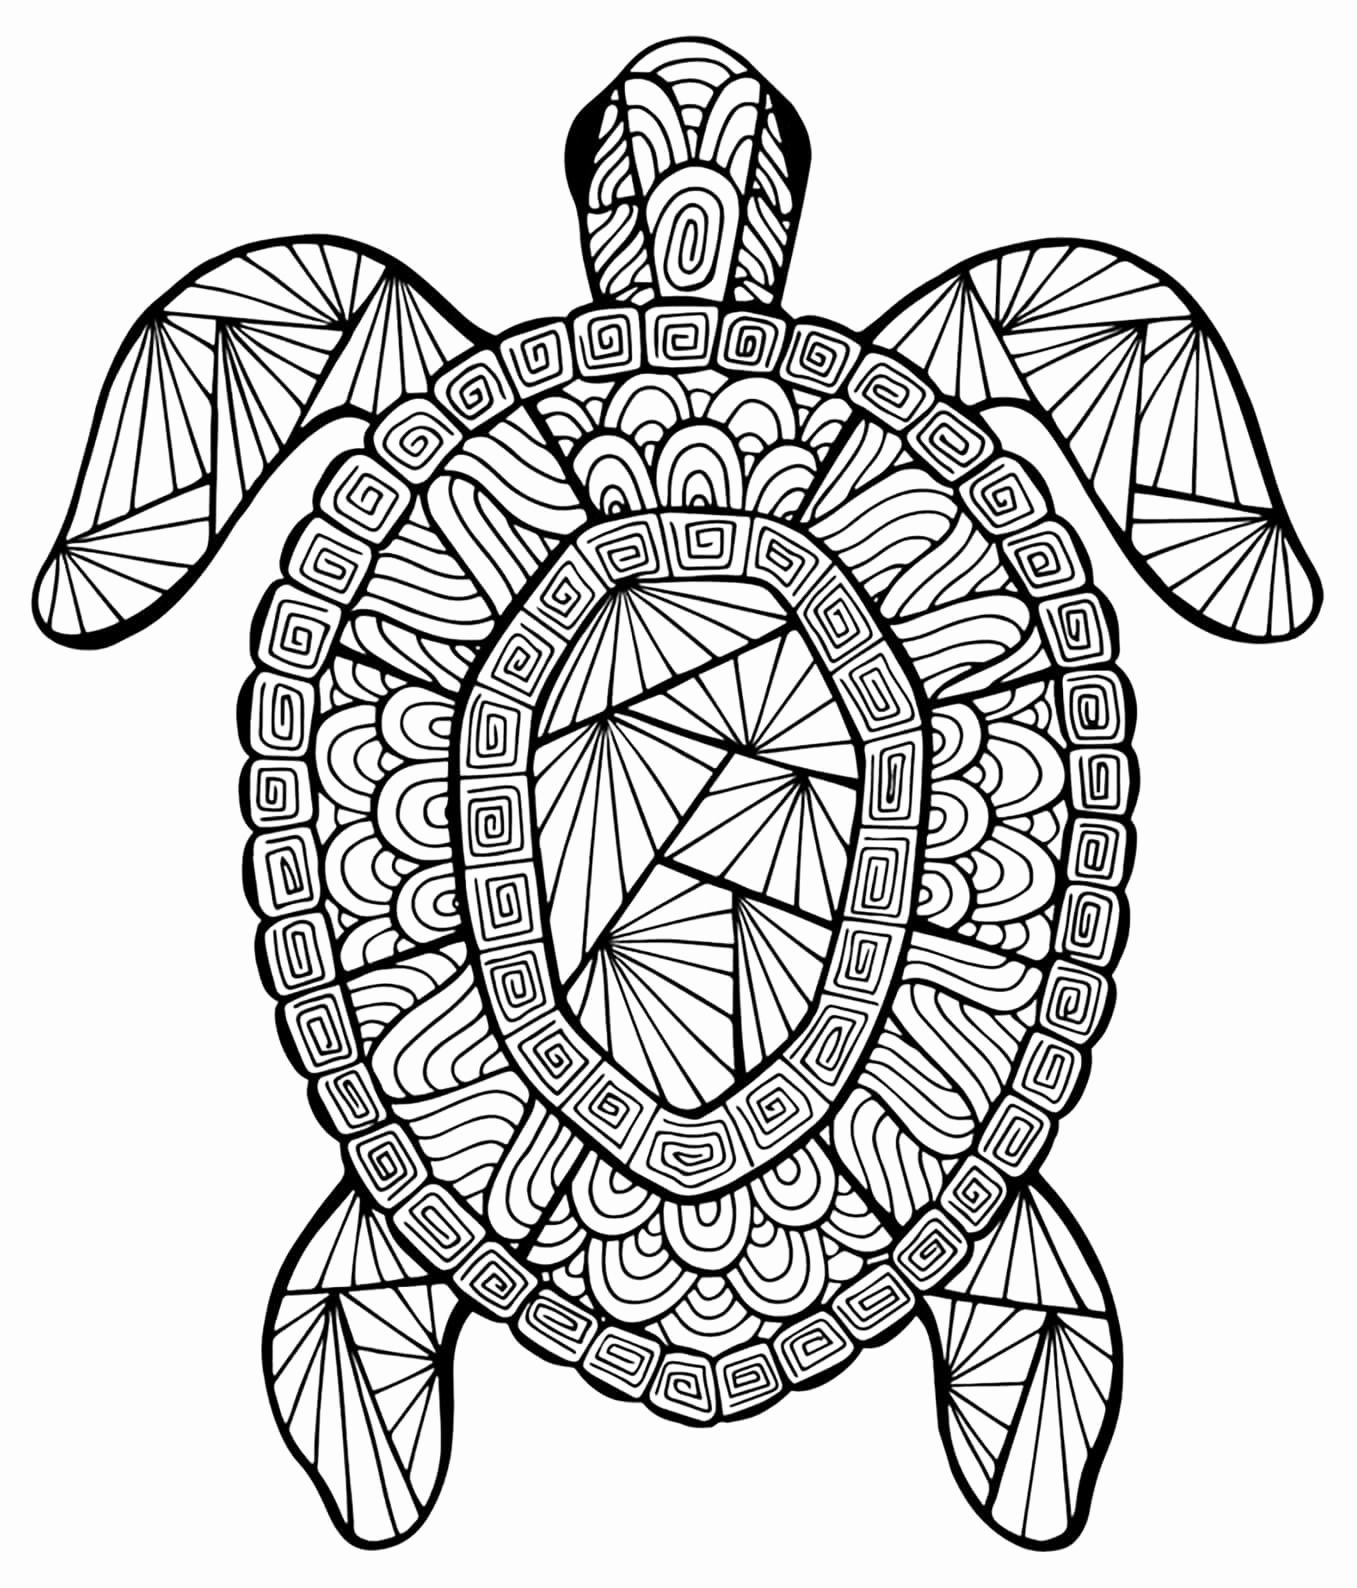 coloring book ~ Detailed Coloring Pages For Kids Printableheets Free Very  Christmas Google Landscape 86 Detailed Coloring Sheets Photo Inspirations.  Printable Detailed Coloring Pages. Detailed Coloring Sheets For Kids  Printable For Free.